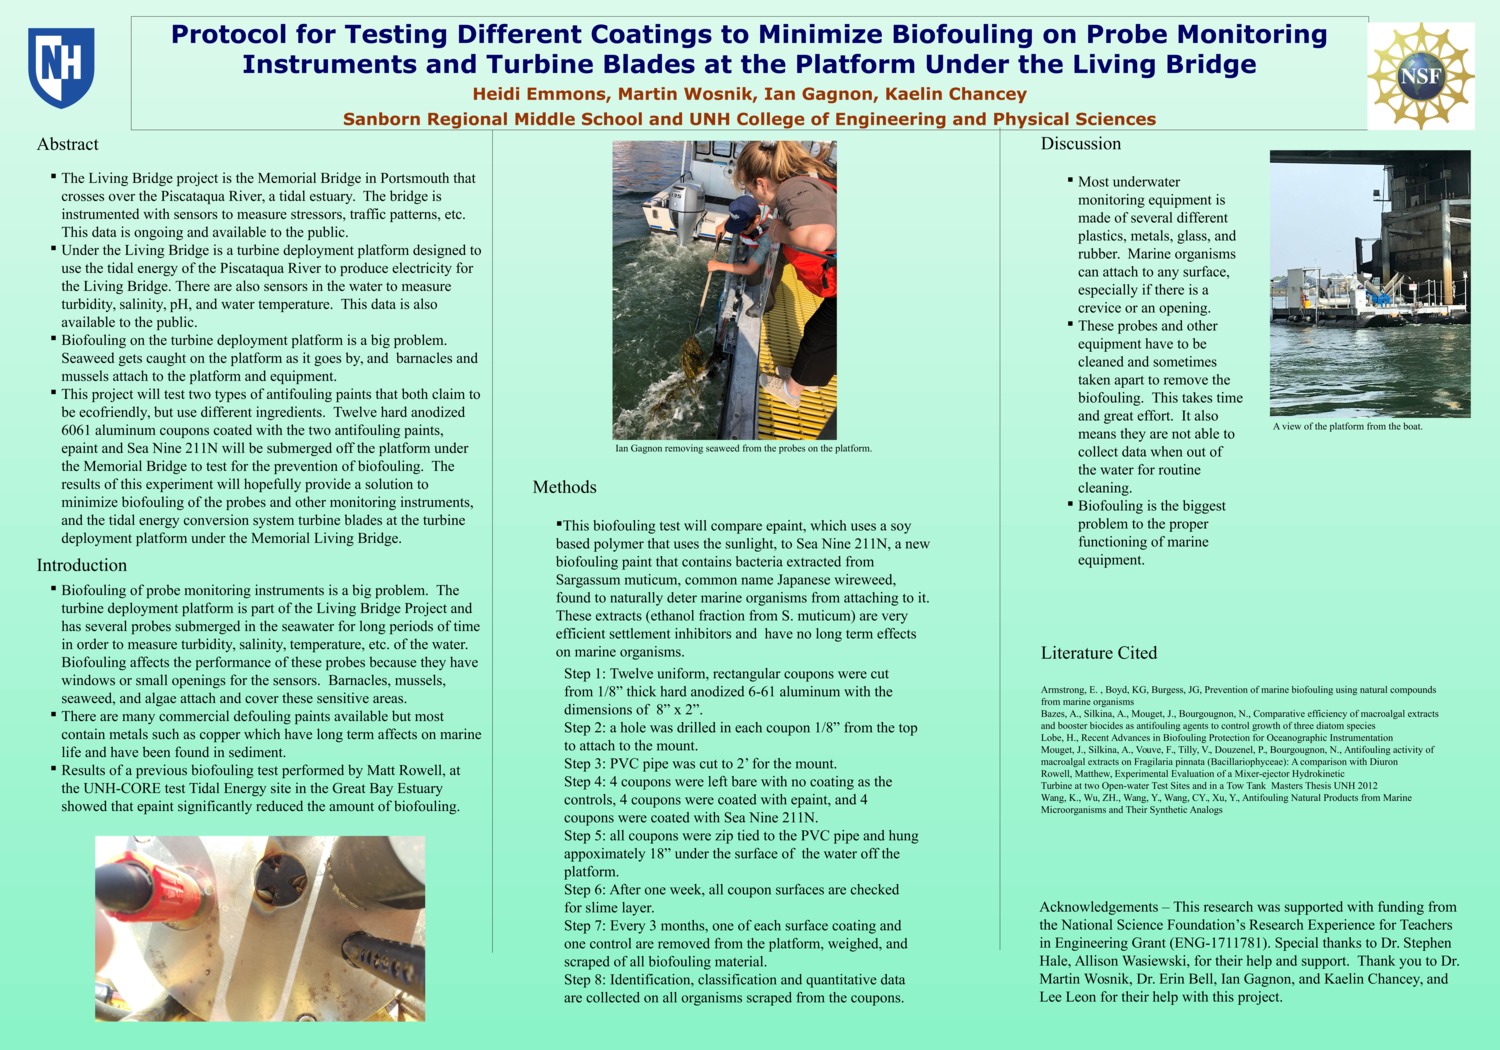 Protocol For Testing Different Coatings To Minimize Biofouling On Probe Monitoring Instruments And Turbine Blades At The Platform Under The Living Bridge by Heidi